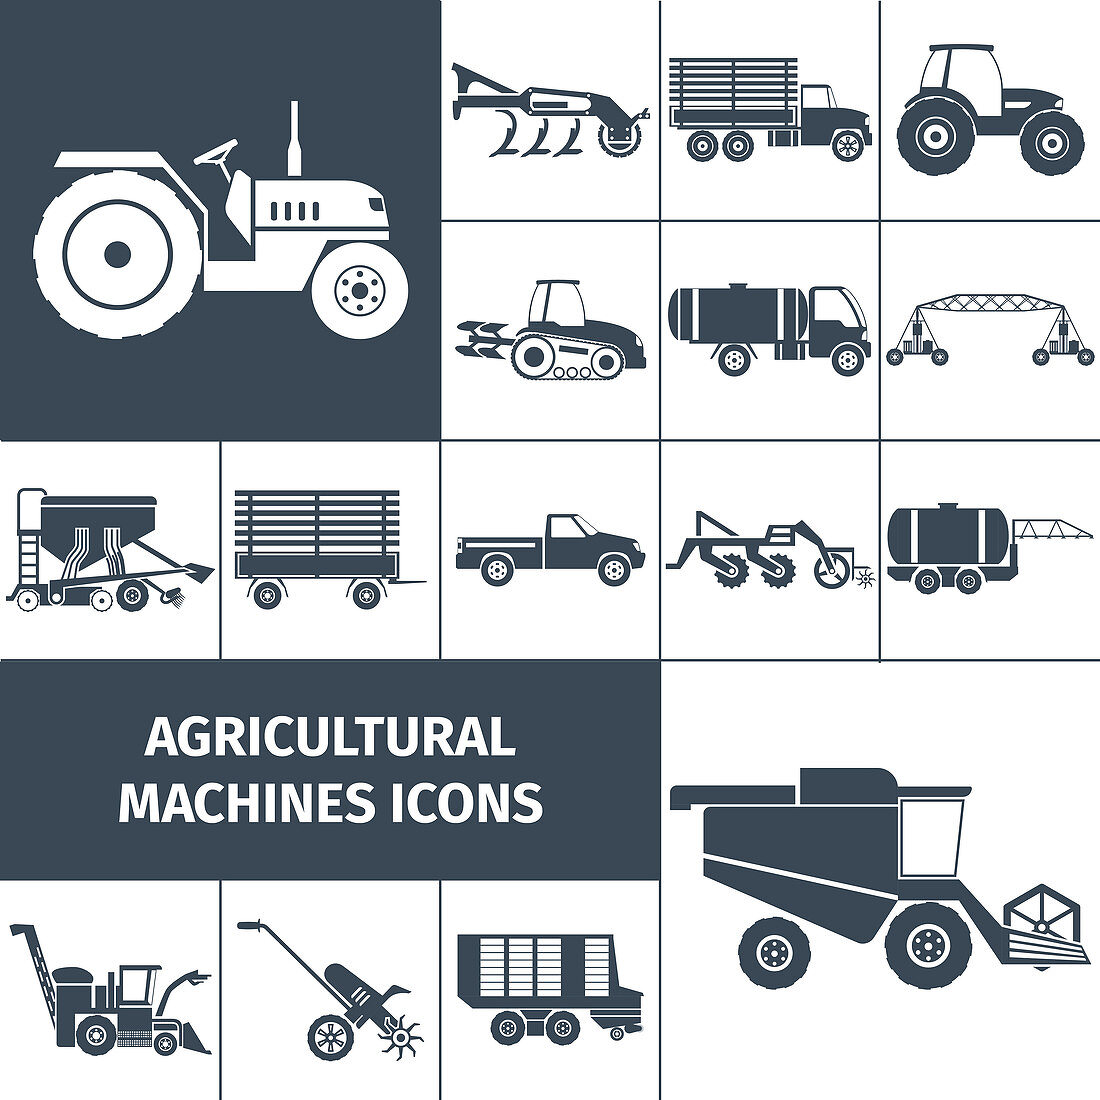 Agricultural machine icons, illustration